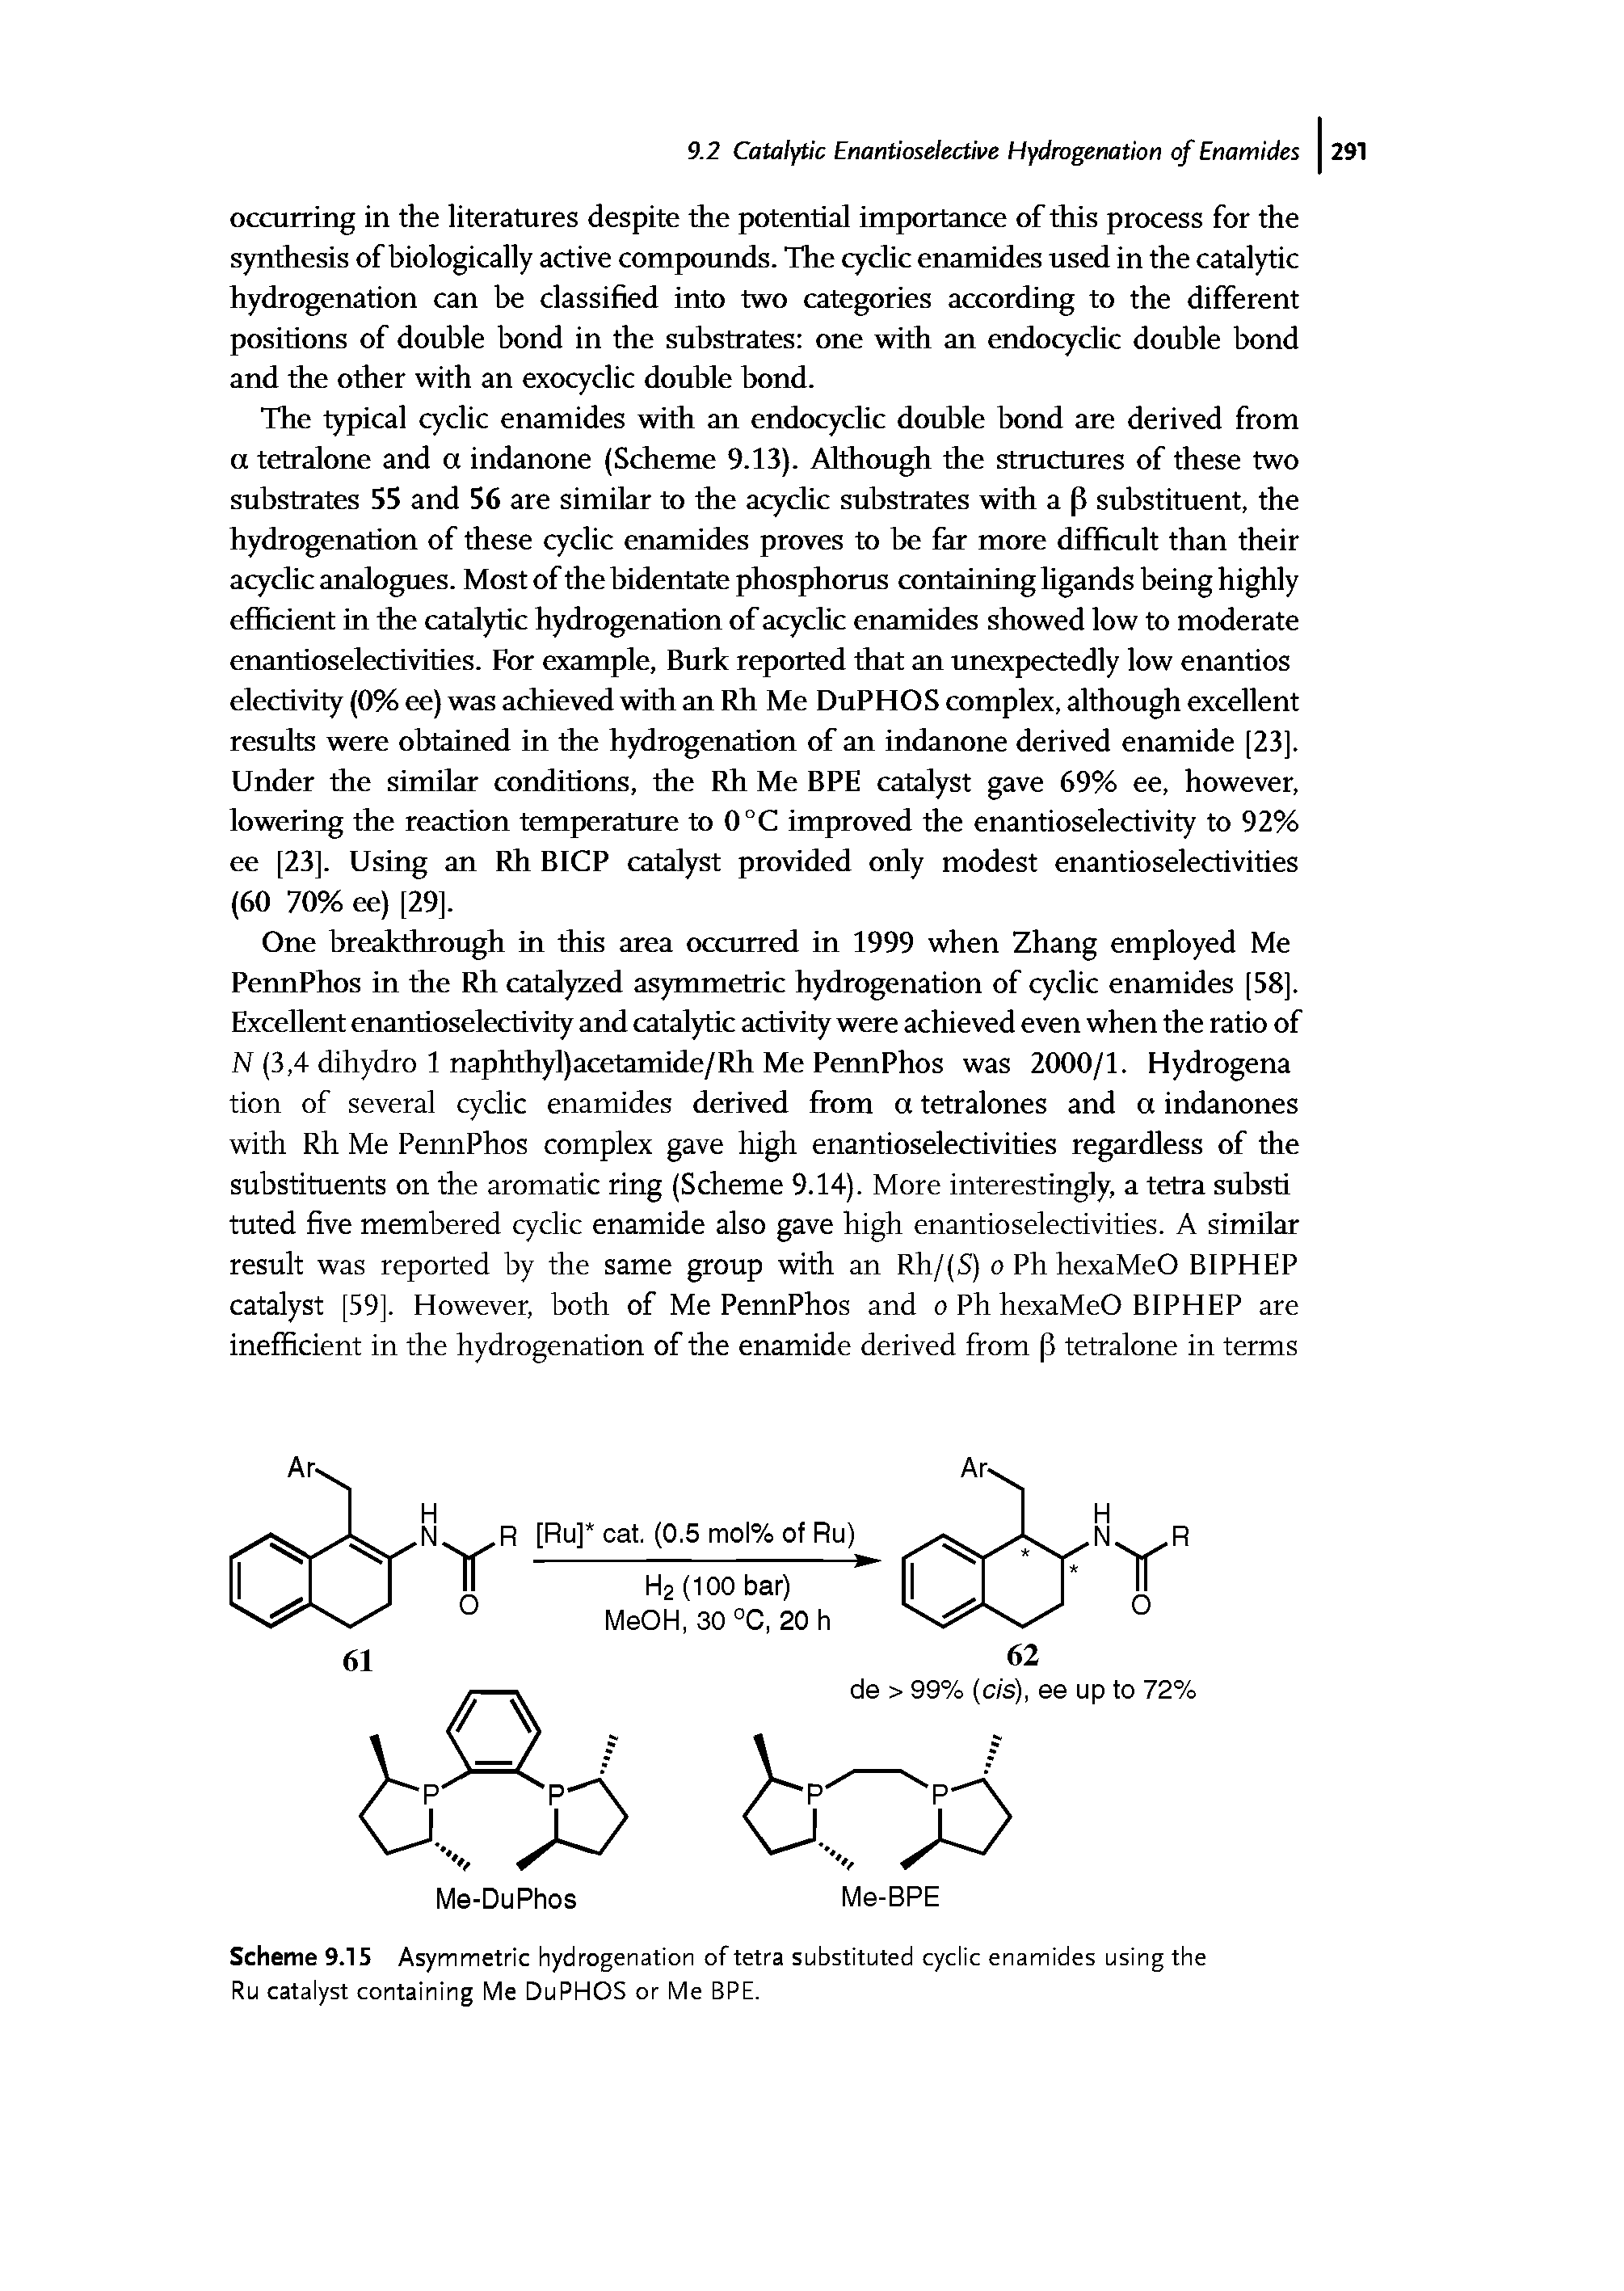 Scheme 9.15 Asymmetric hydrogenation of tetra substituted cyclic enamides using the Ru catalyst containing Me DuPHOS or Me BPE.